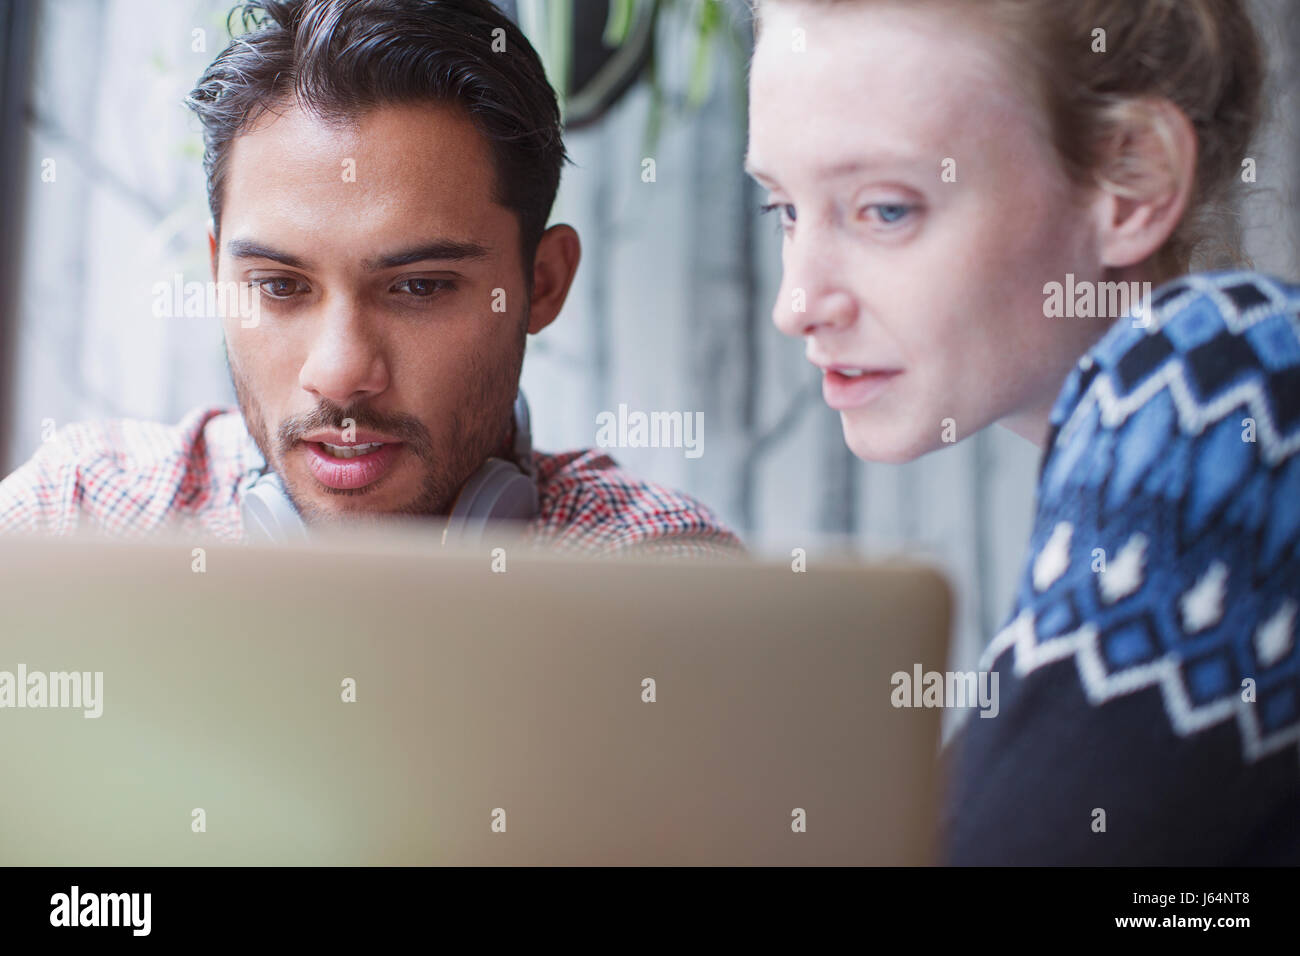 Serious young man and woman using laptop in cafe Stock Photo